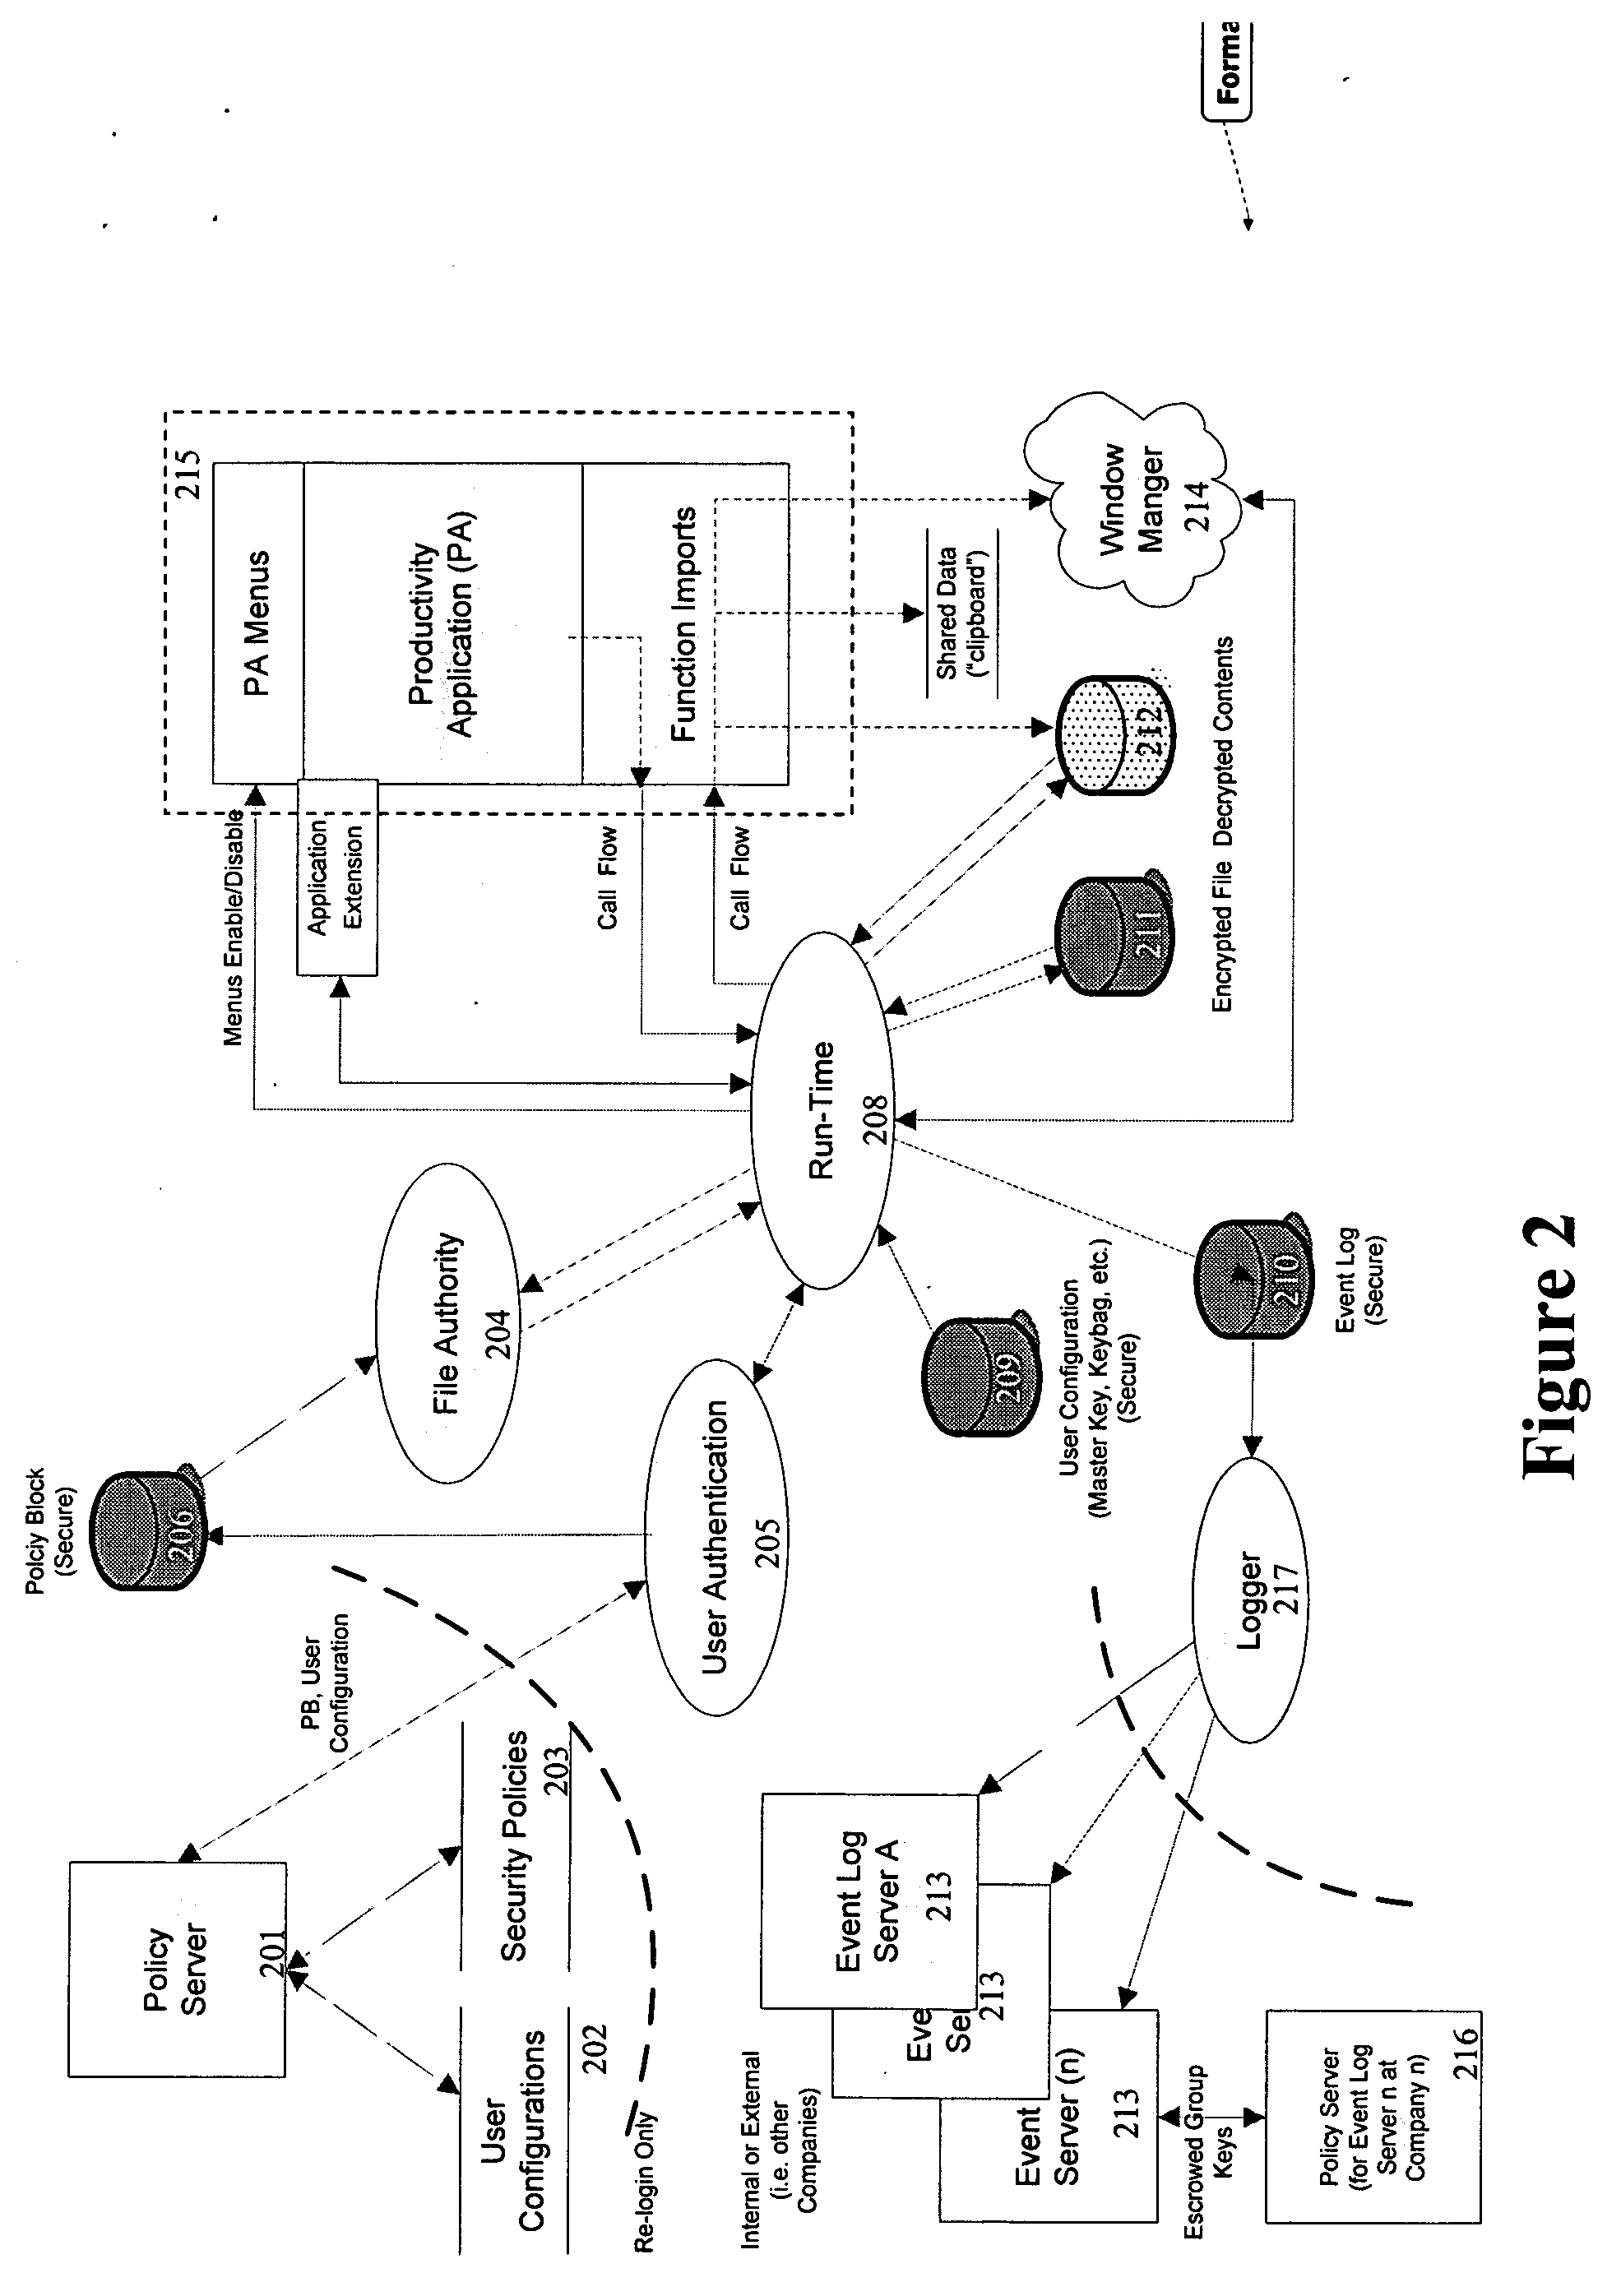 Electronic data security system and method